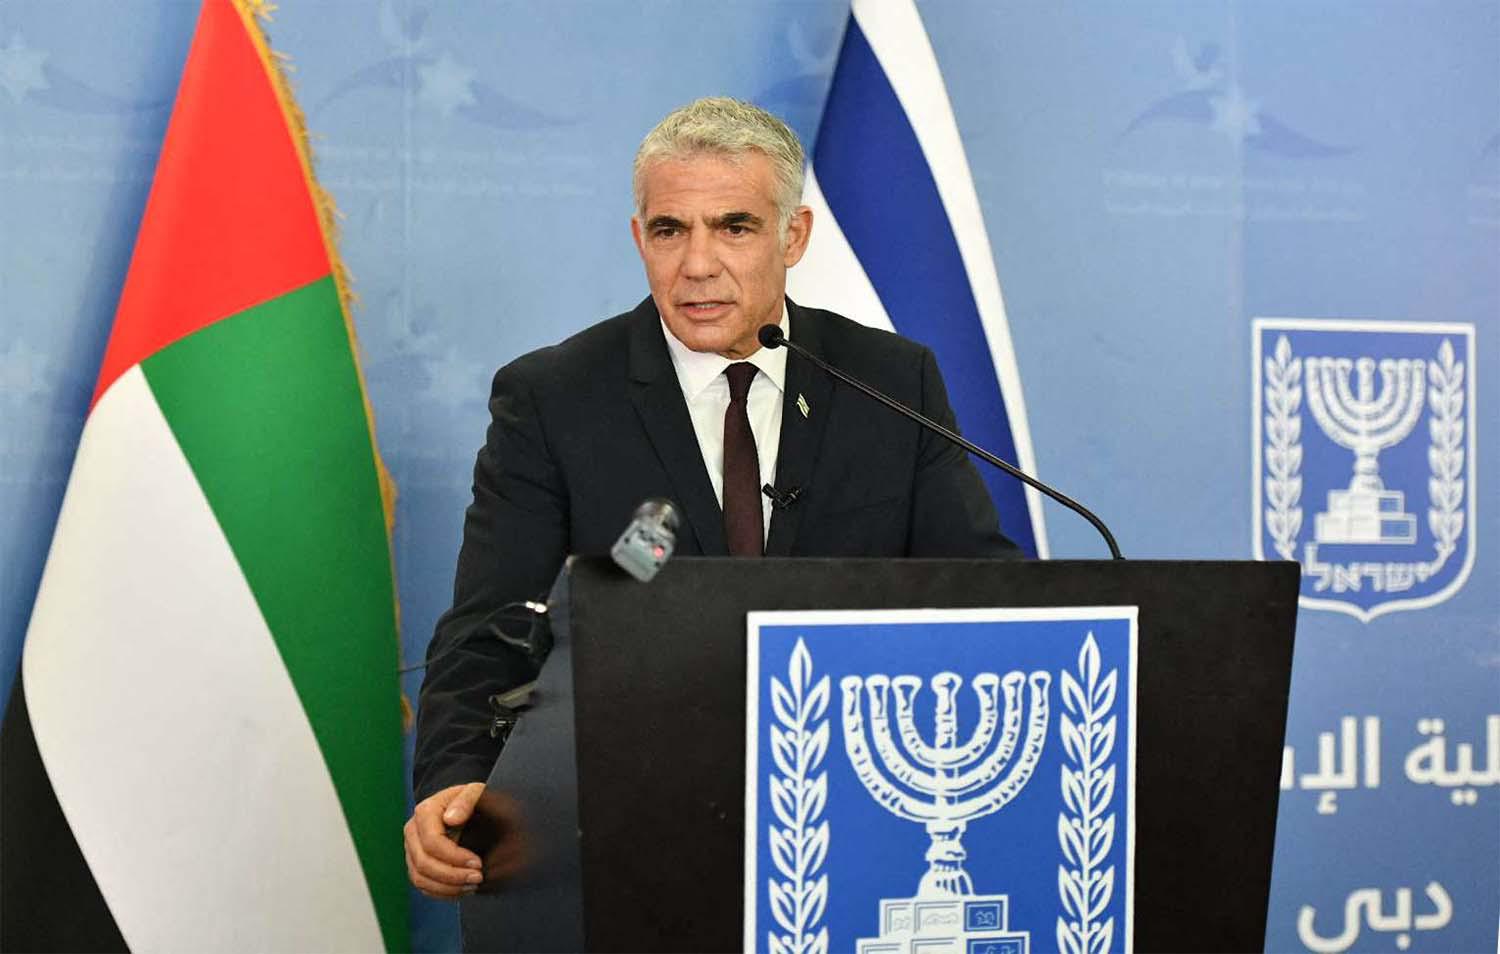 Lapid inaugurated Israel's temporary embassy in Abu Dhabi and consulate in Dubai